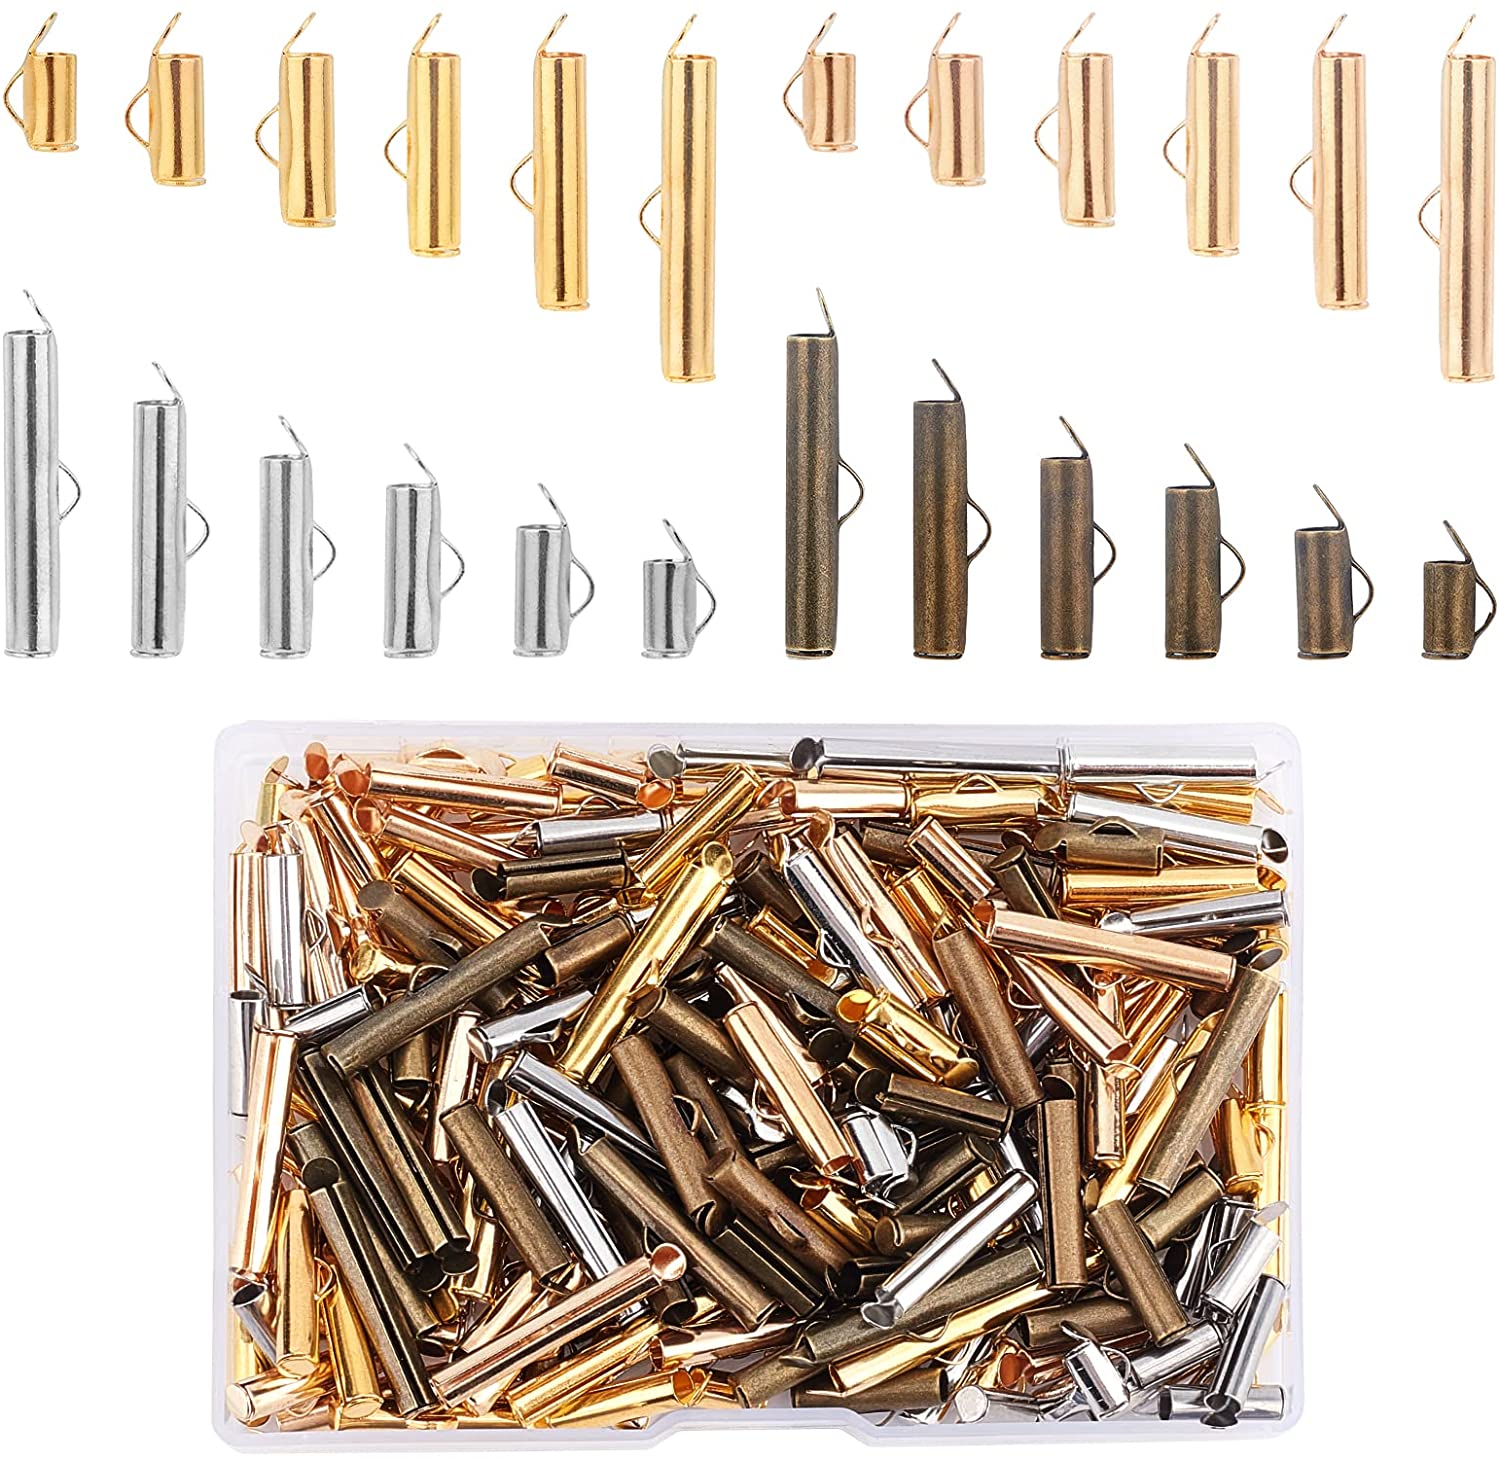 100pcs/Box Brass Slide On End Clasps Tube Bead Loom Bronze w/ Chain Clasp Rings 